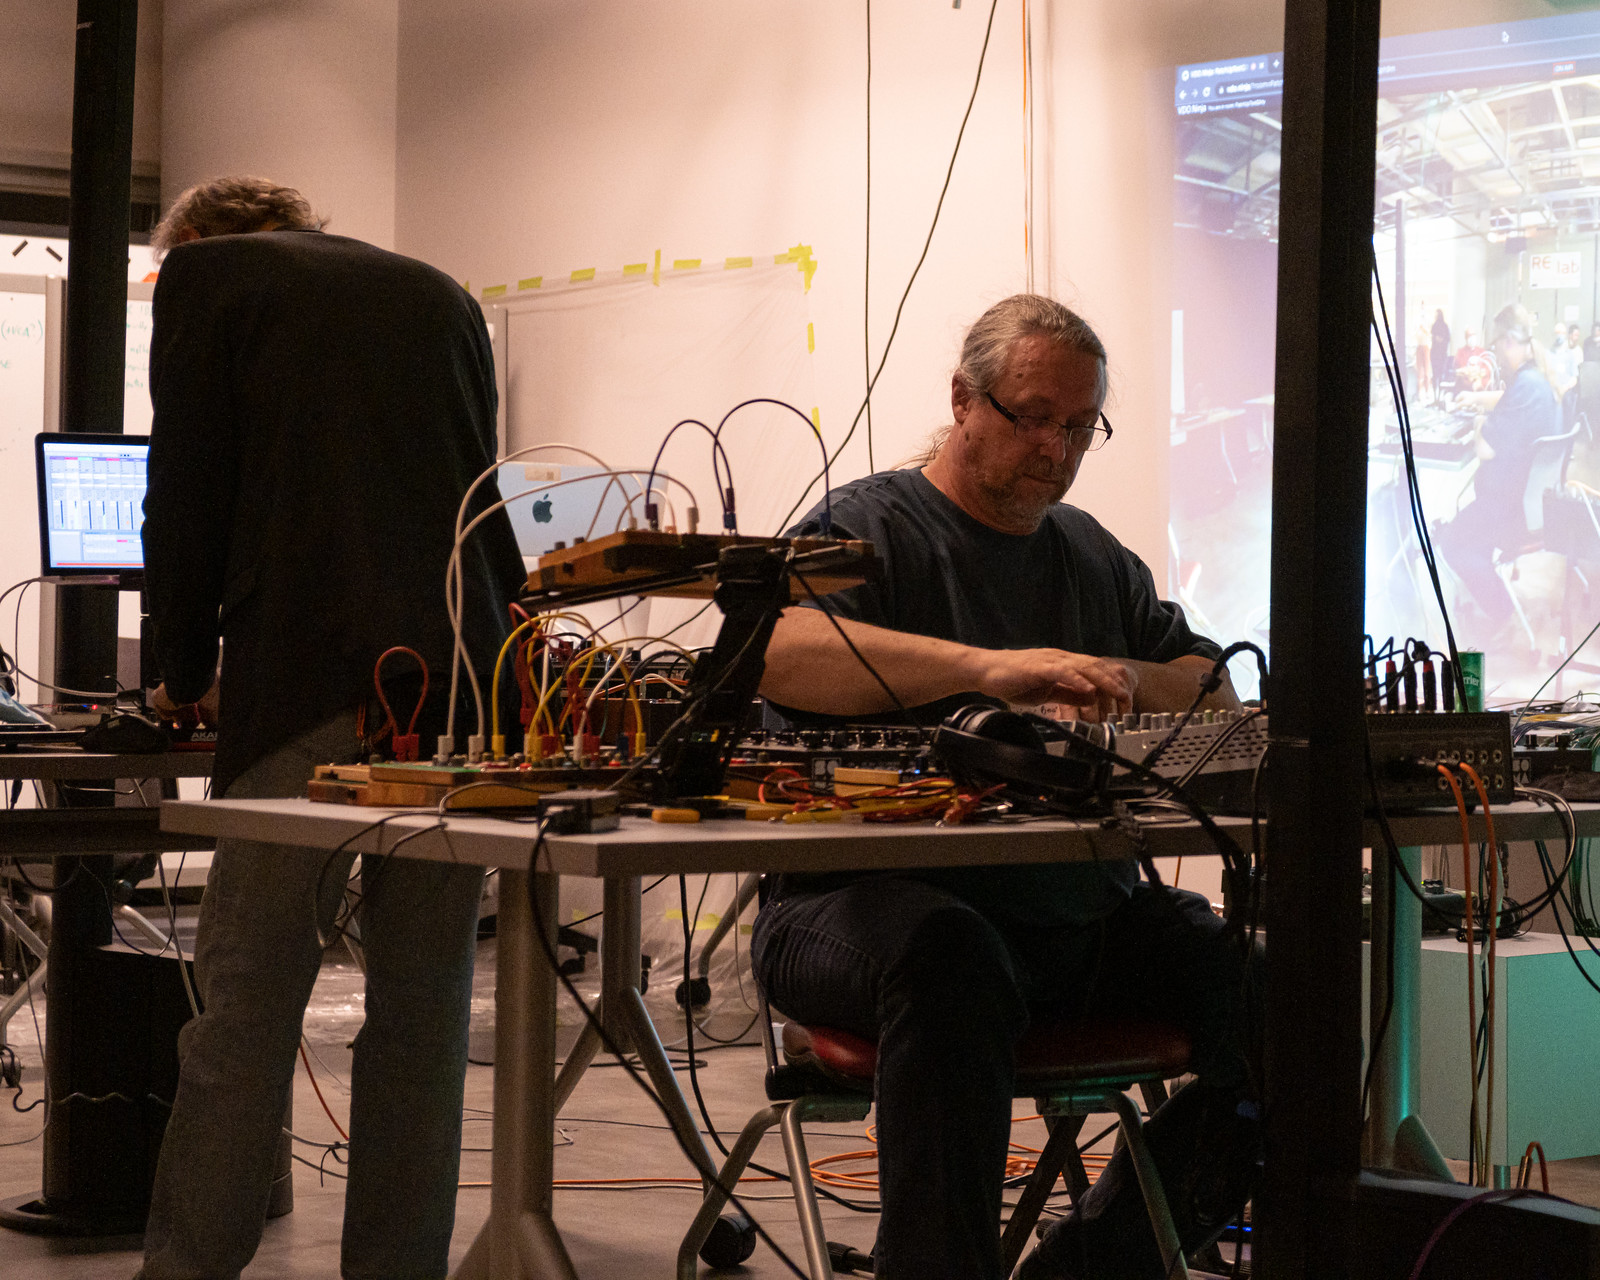 Not Your Average Worker Bees at Patch-Up Modular Synth Conference in Toronto